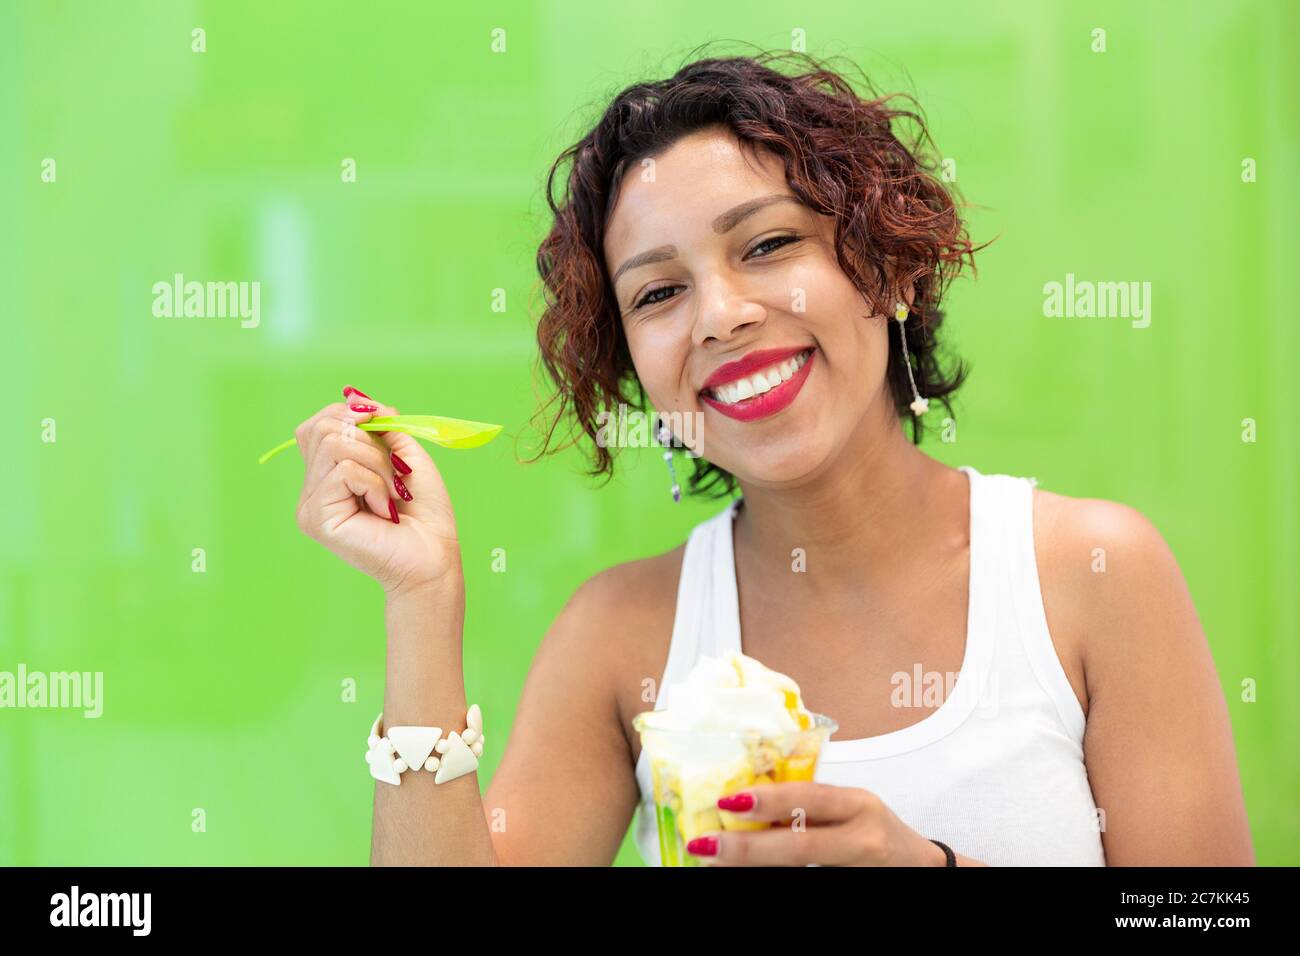 Close-up of smiling latin woman holding an ice cream on a green background. Space for text. Selective focus. Summer and lifestyle concept. Stock Photo